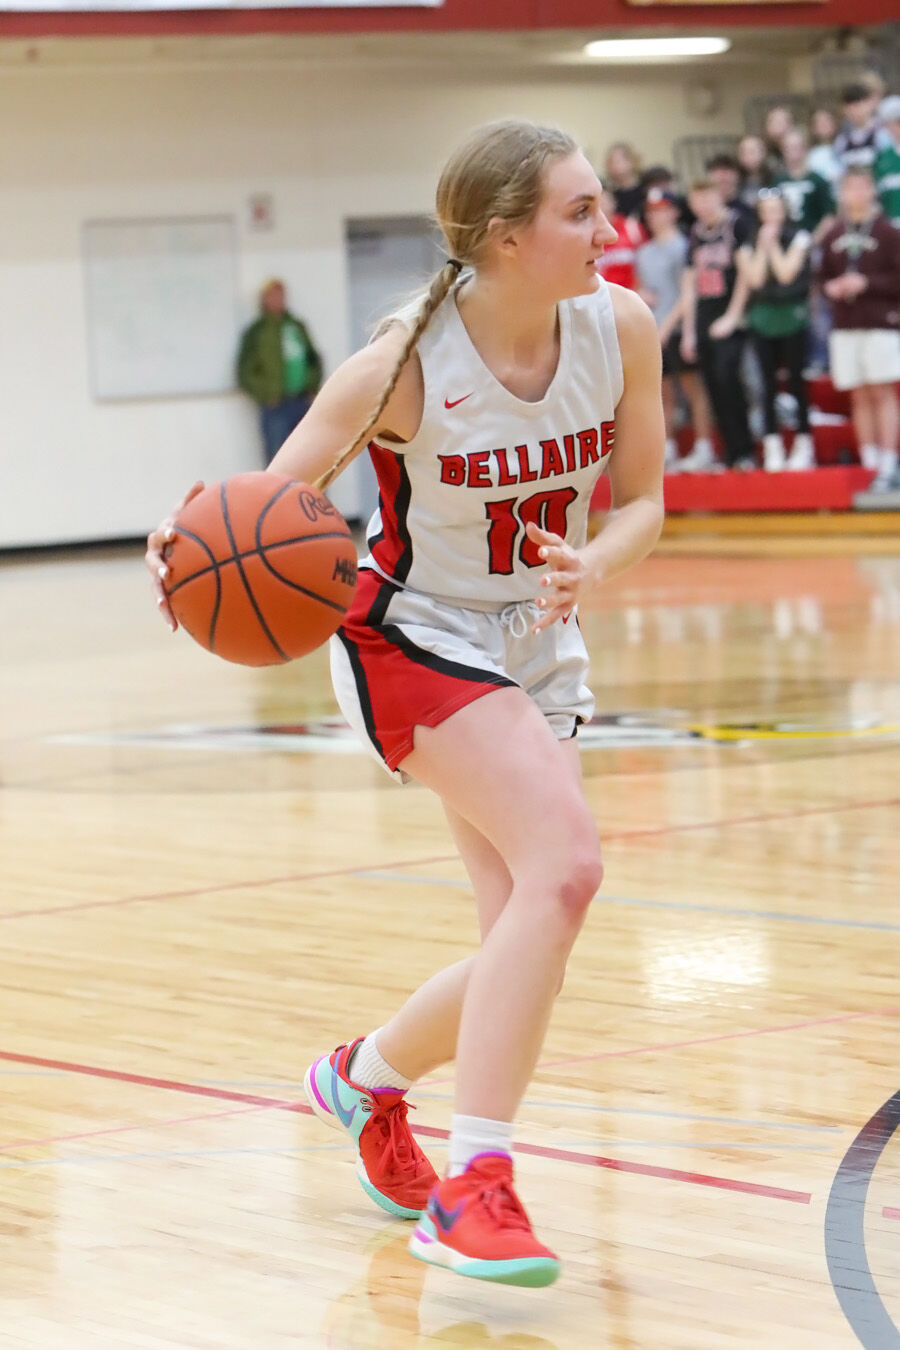 High School Basketball Roundup: Elk Rapids Triumphs Over Kingsley, Lucy Hall Shines with 36 Points in OT Victory